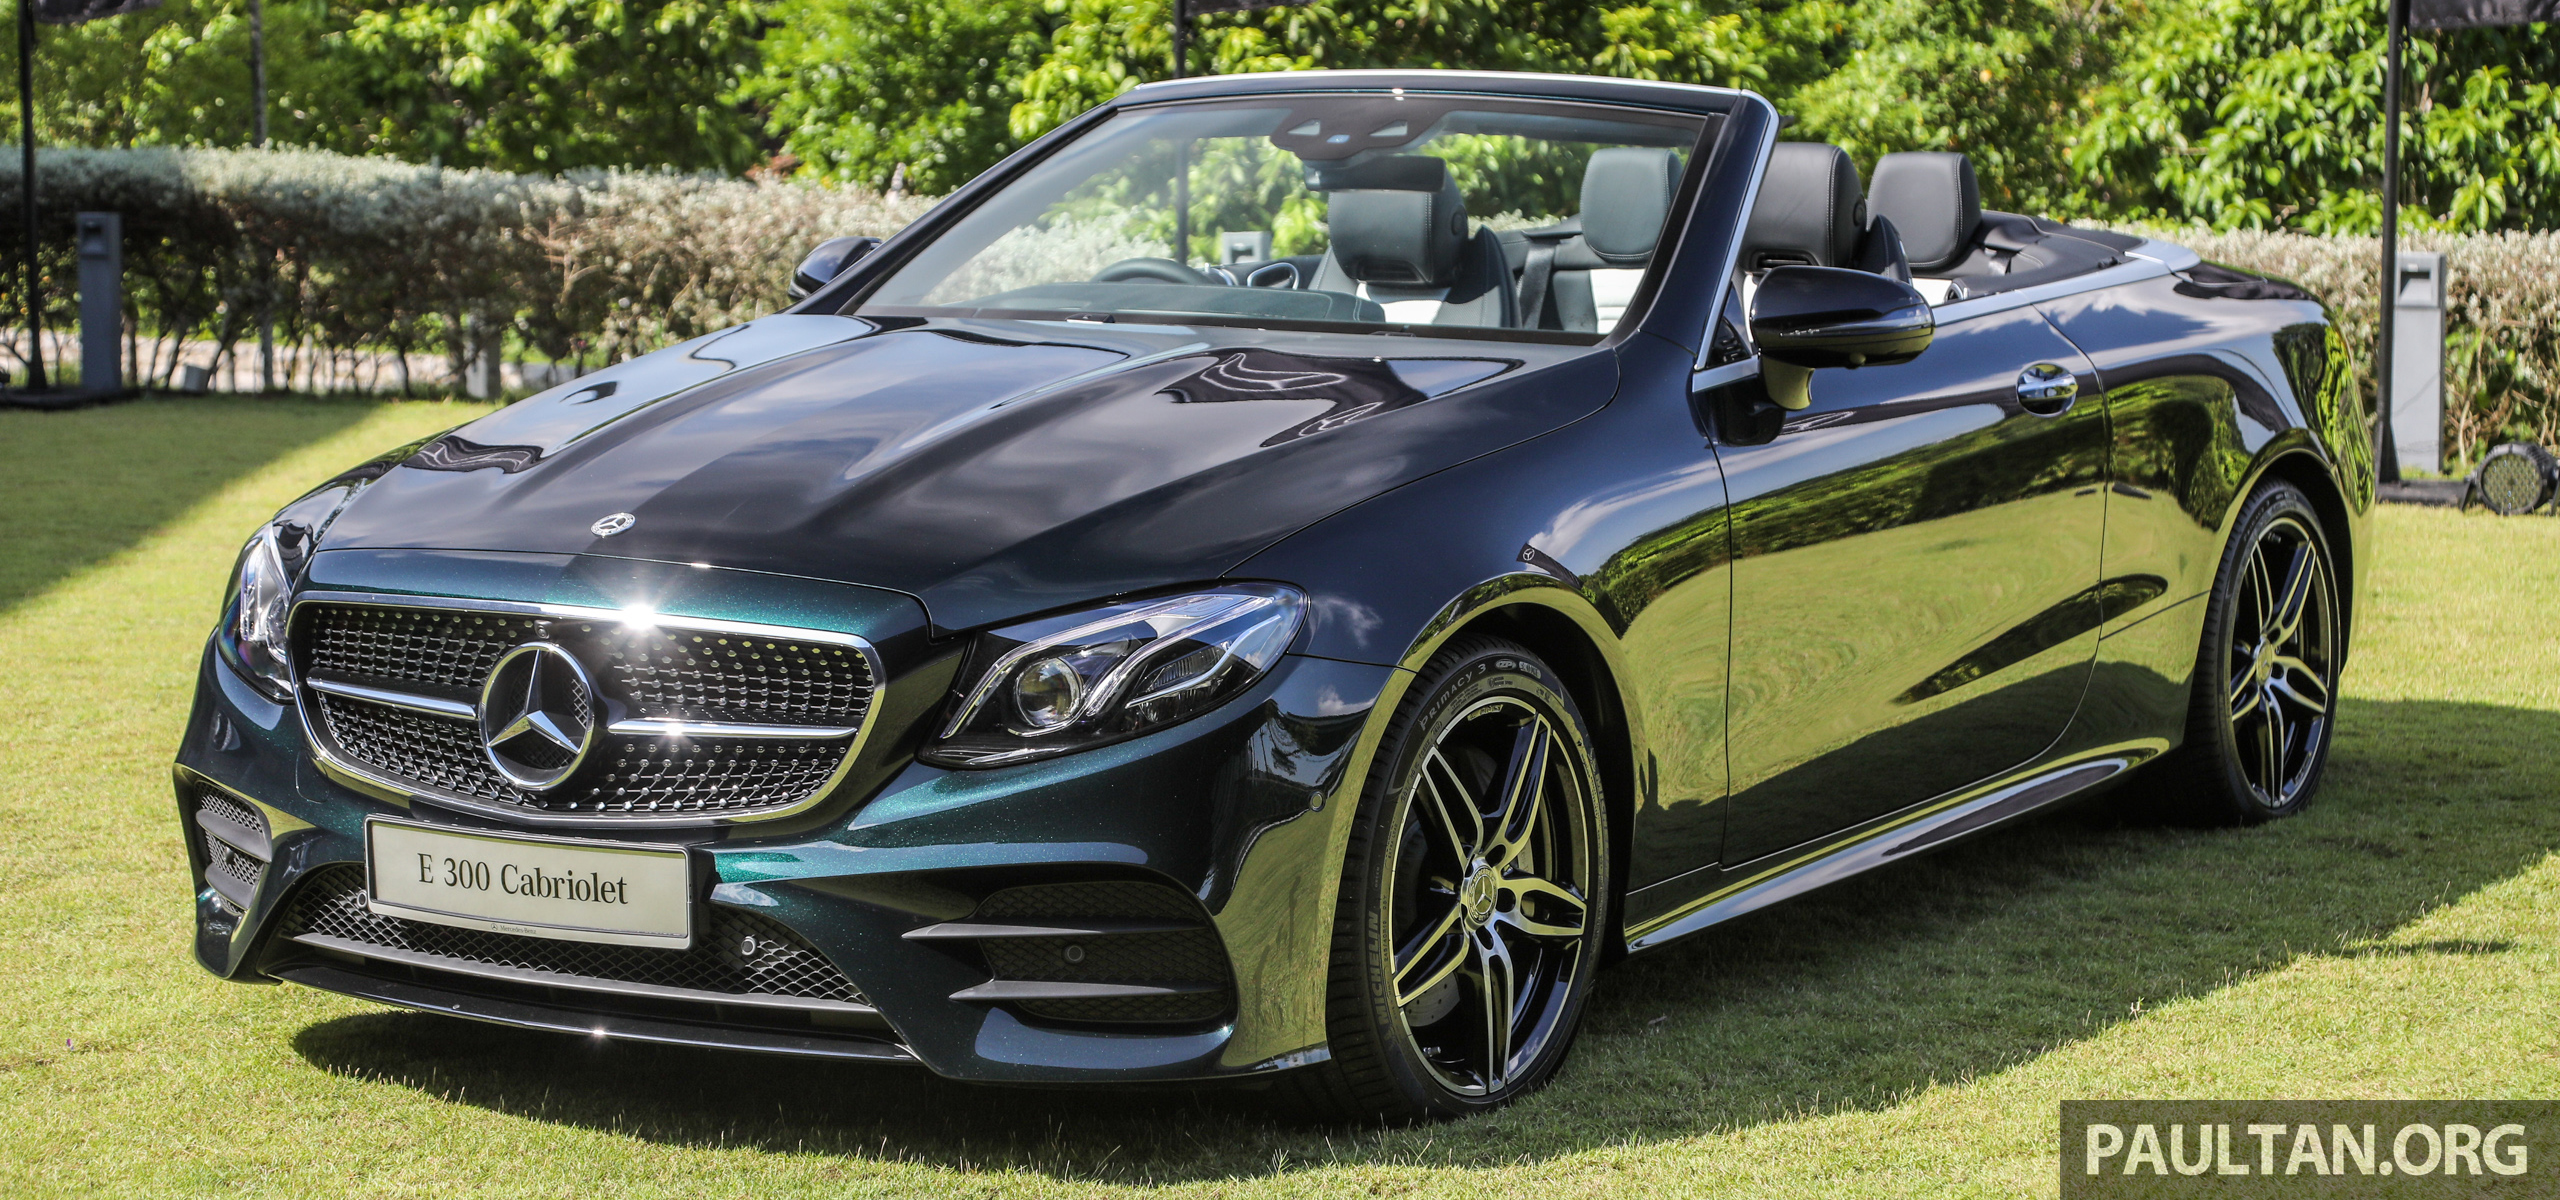 38 Mercedes Benz E Class Cabriolet Launched In Malaysia Sole 00 Variant Available From Rm5k Paultan Org